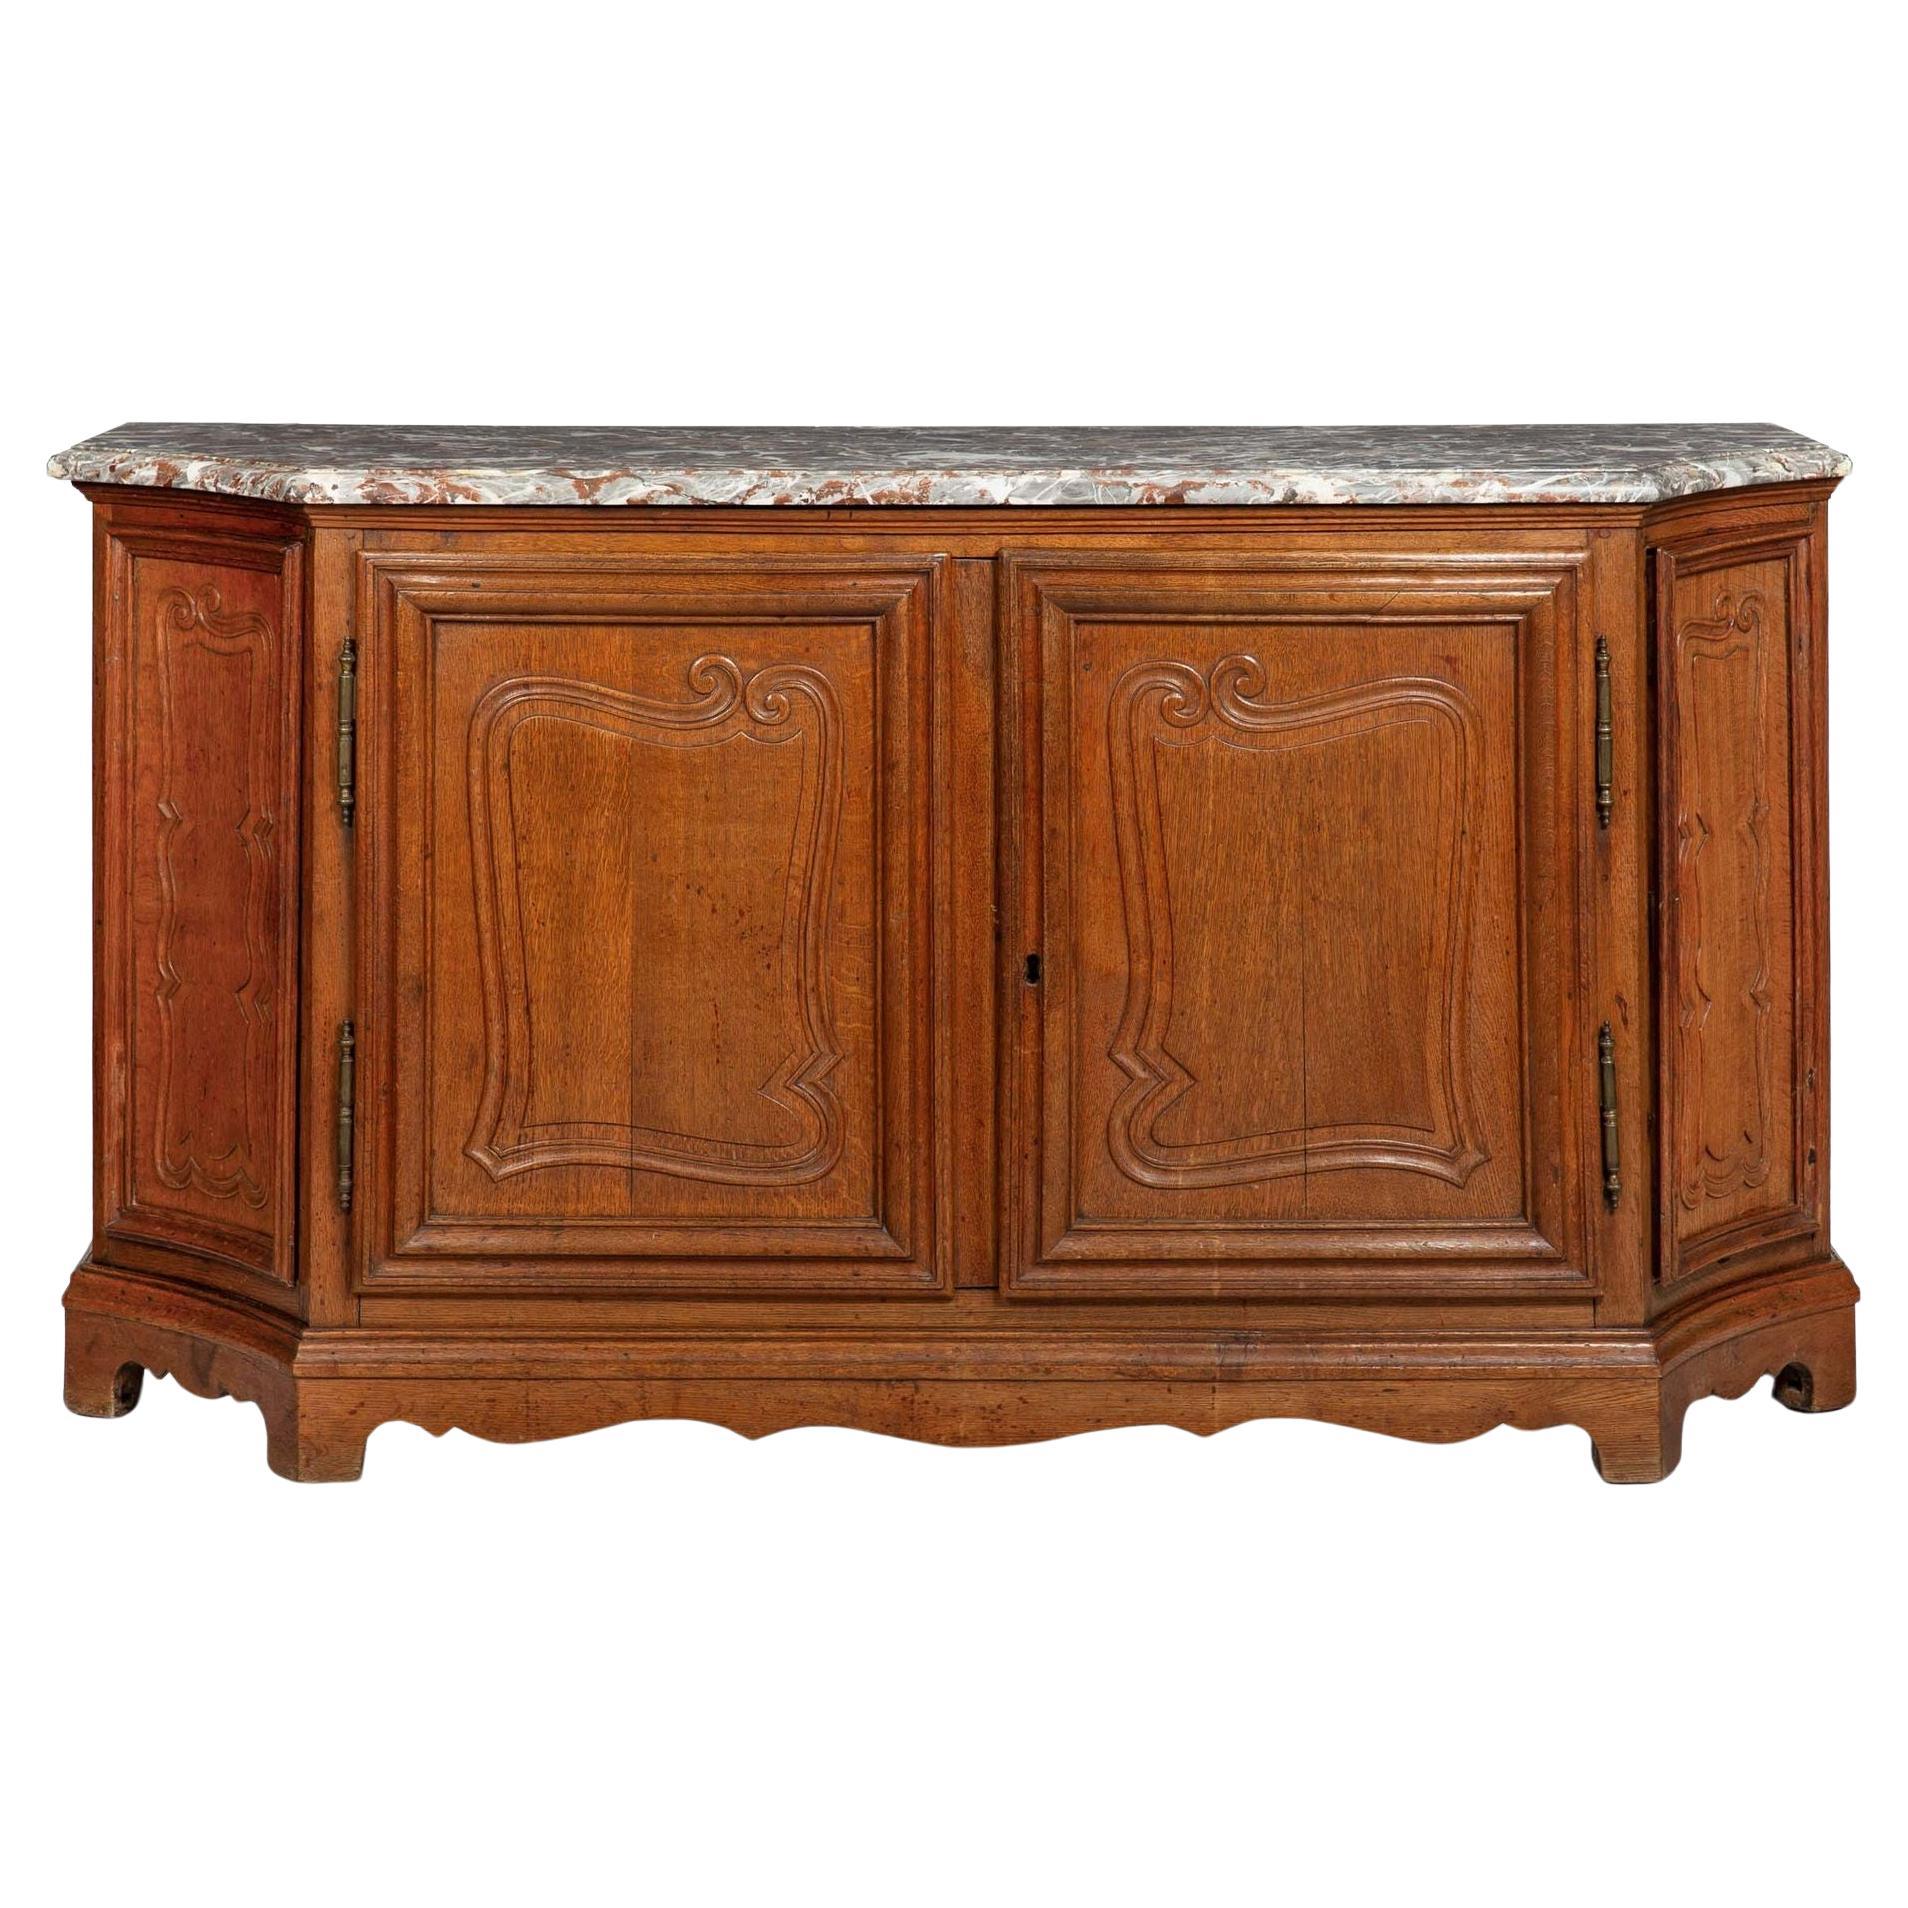 French Provincial Antique Oak and Marble Buffet Sideboard Cabinet ca. 1880